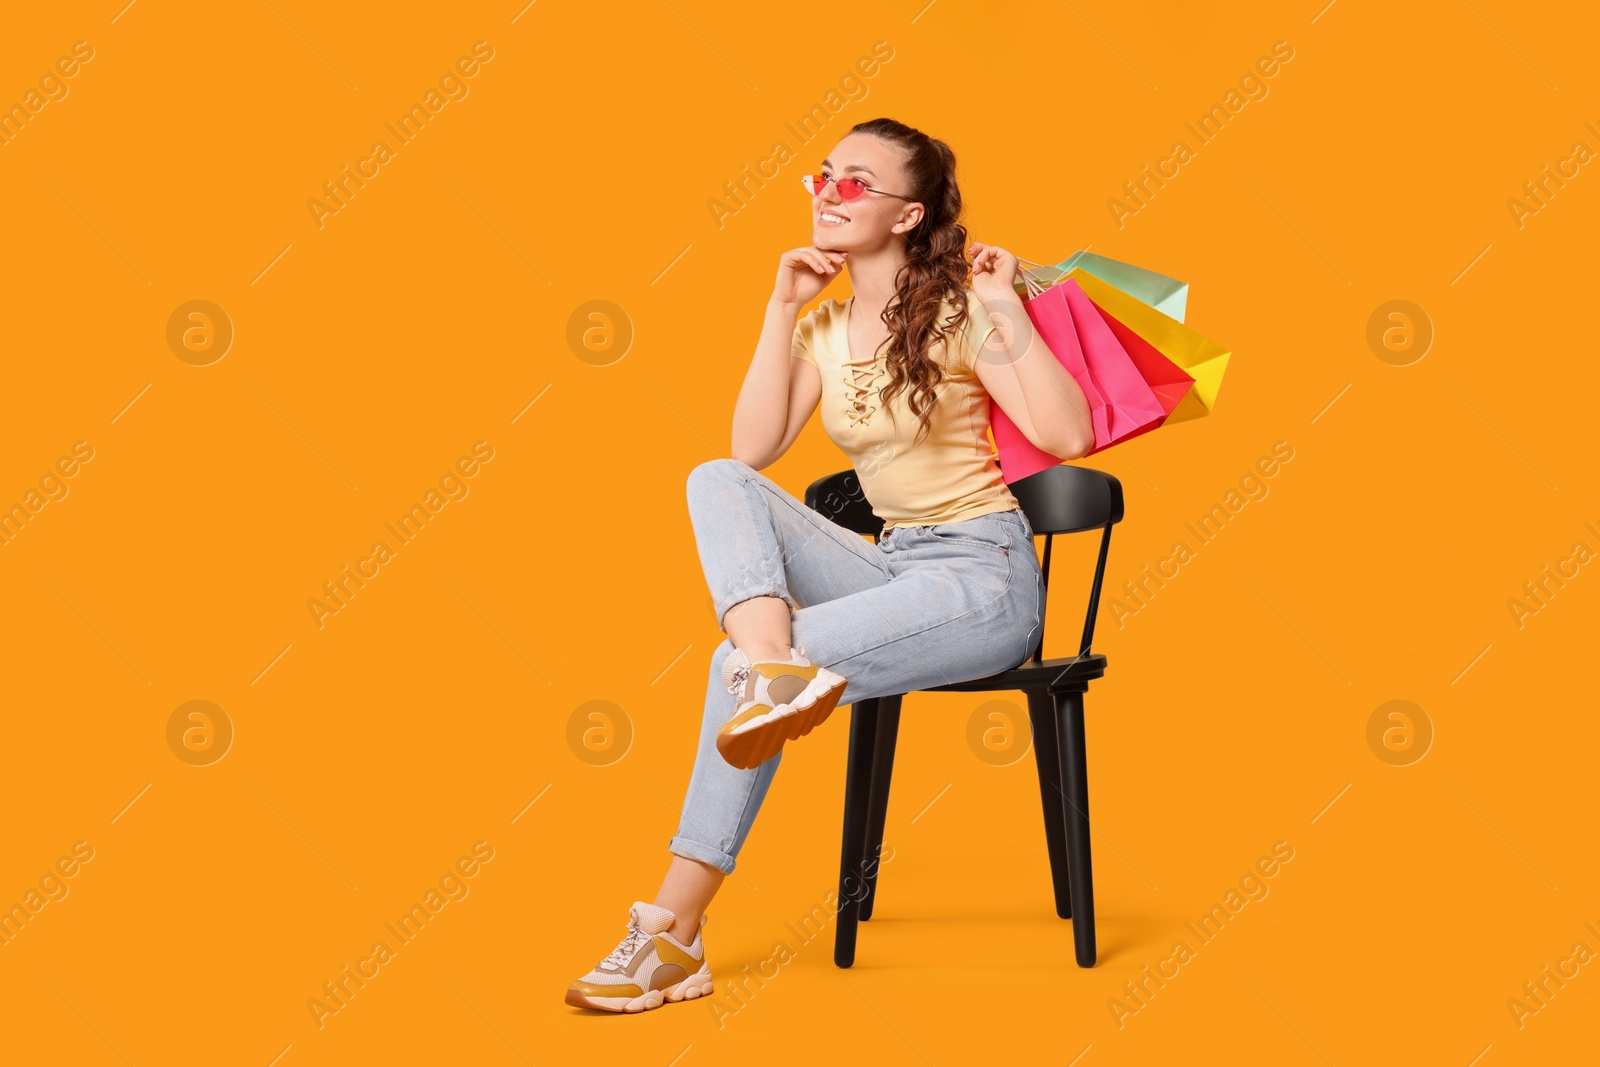 Photo of Happy woman in stylish sunglasses holding colorful shopping bags on chair against orange background